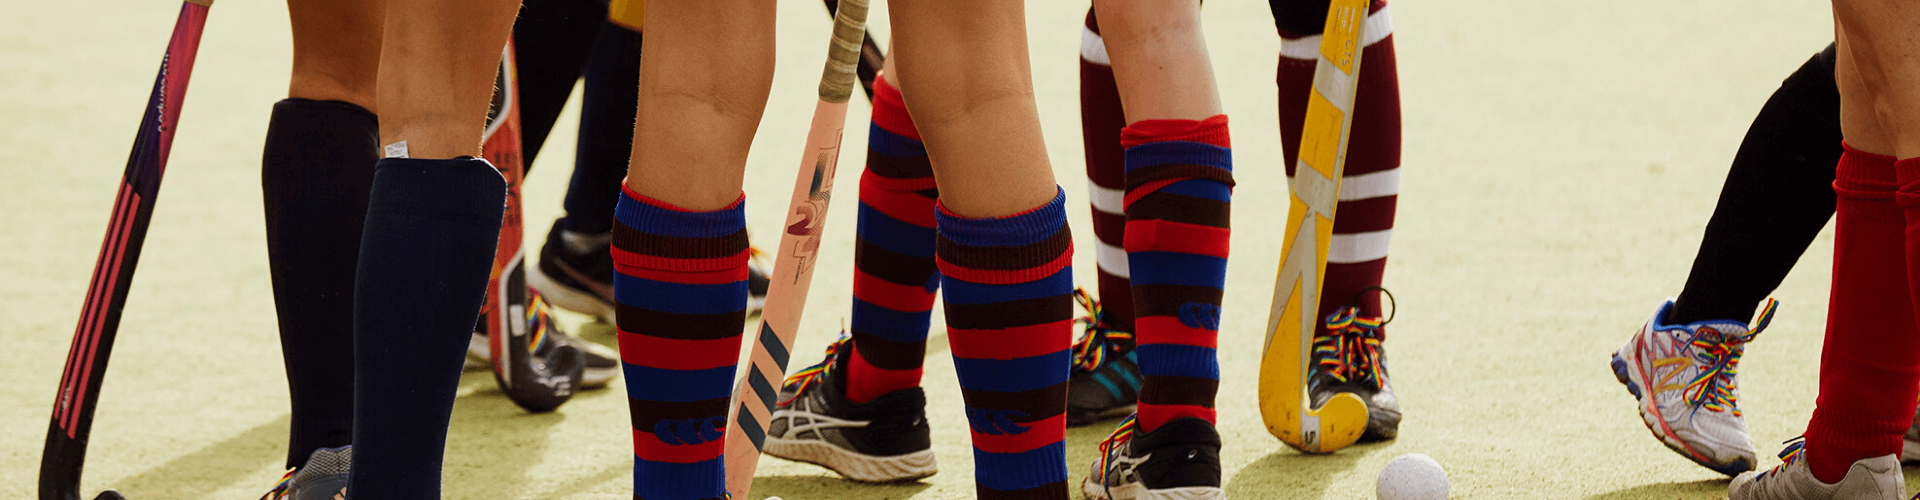 Group of young people playing sport wearing rainbow laces